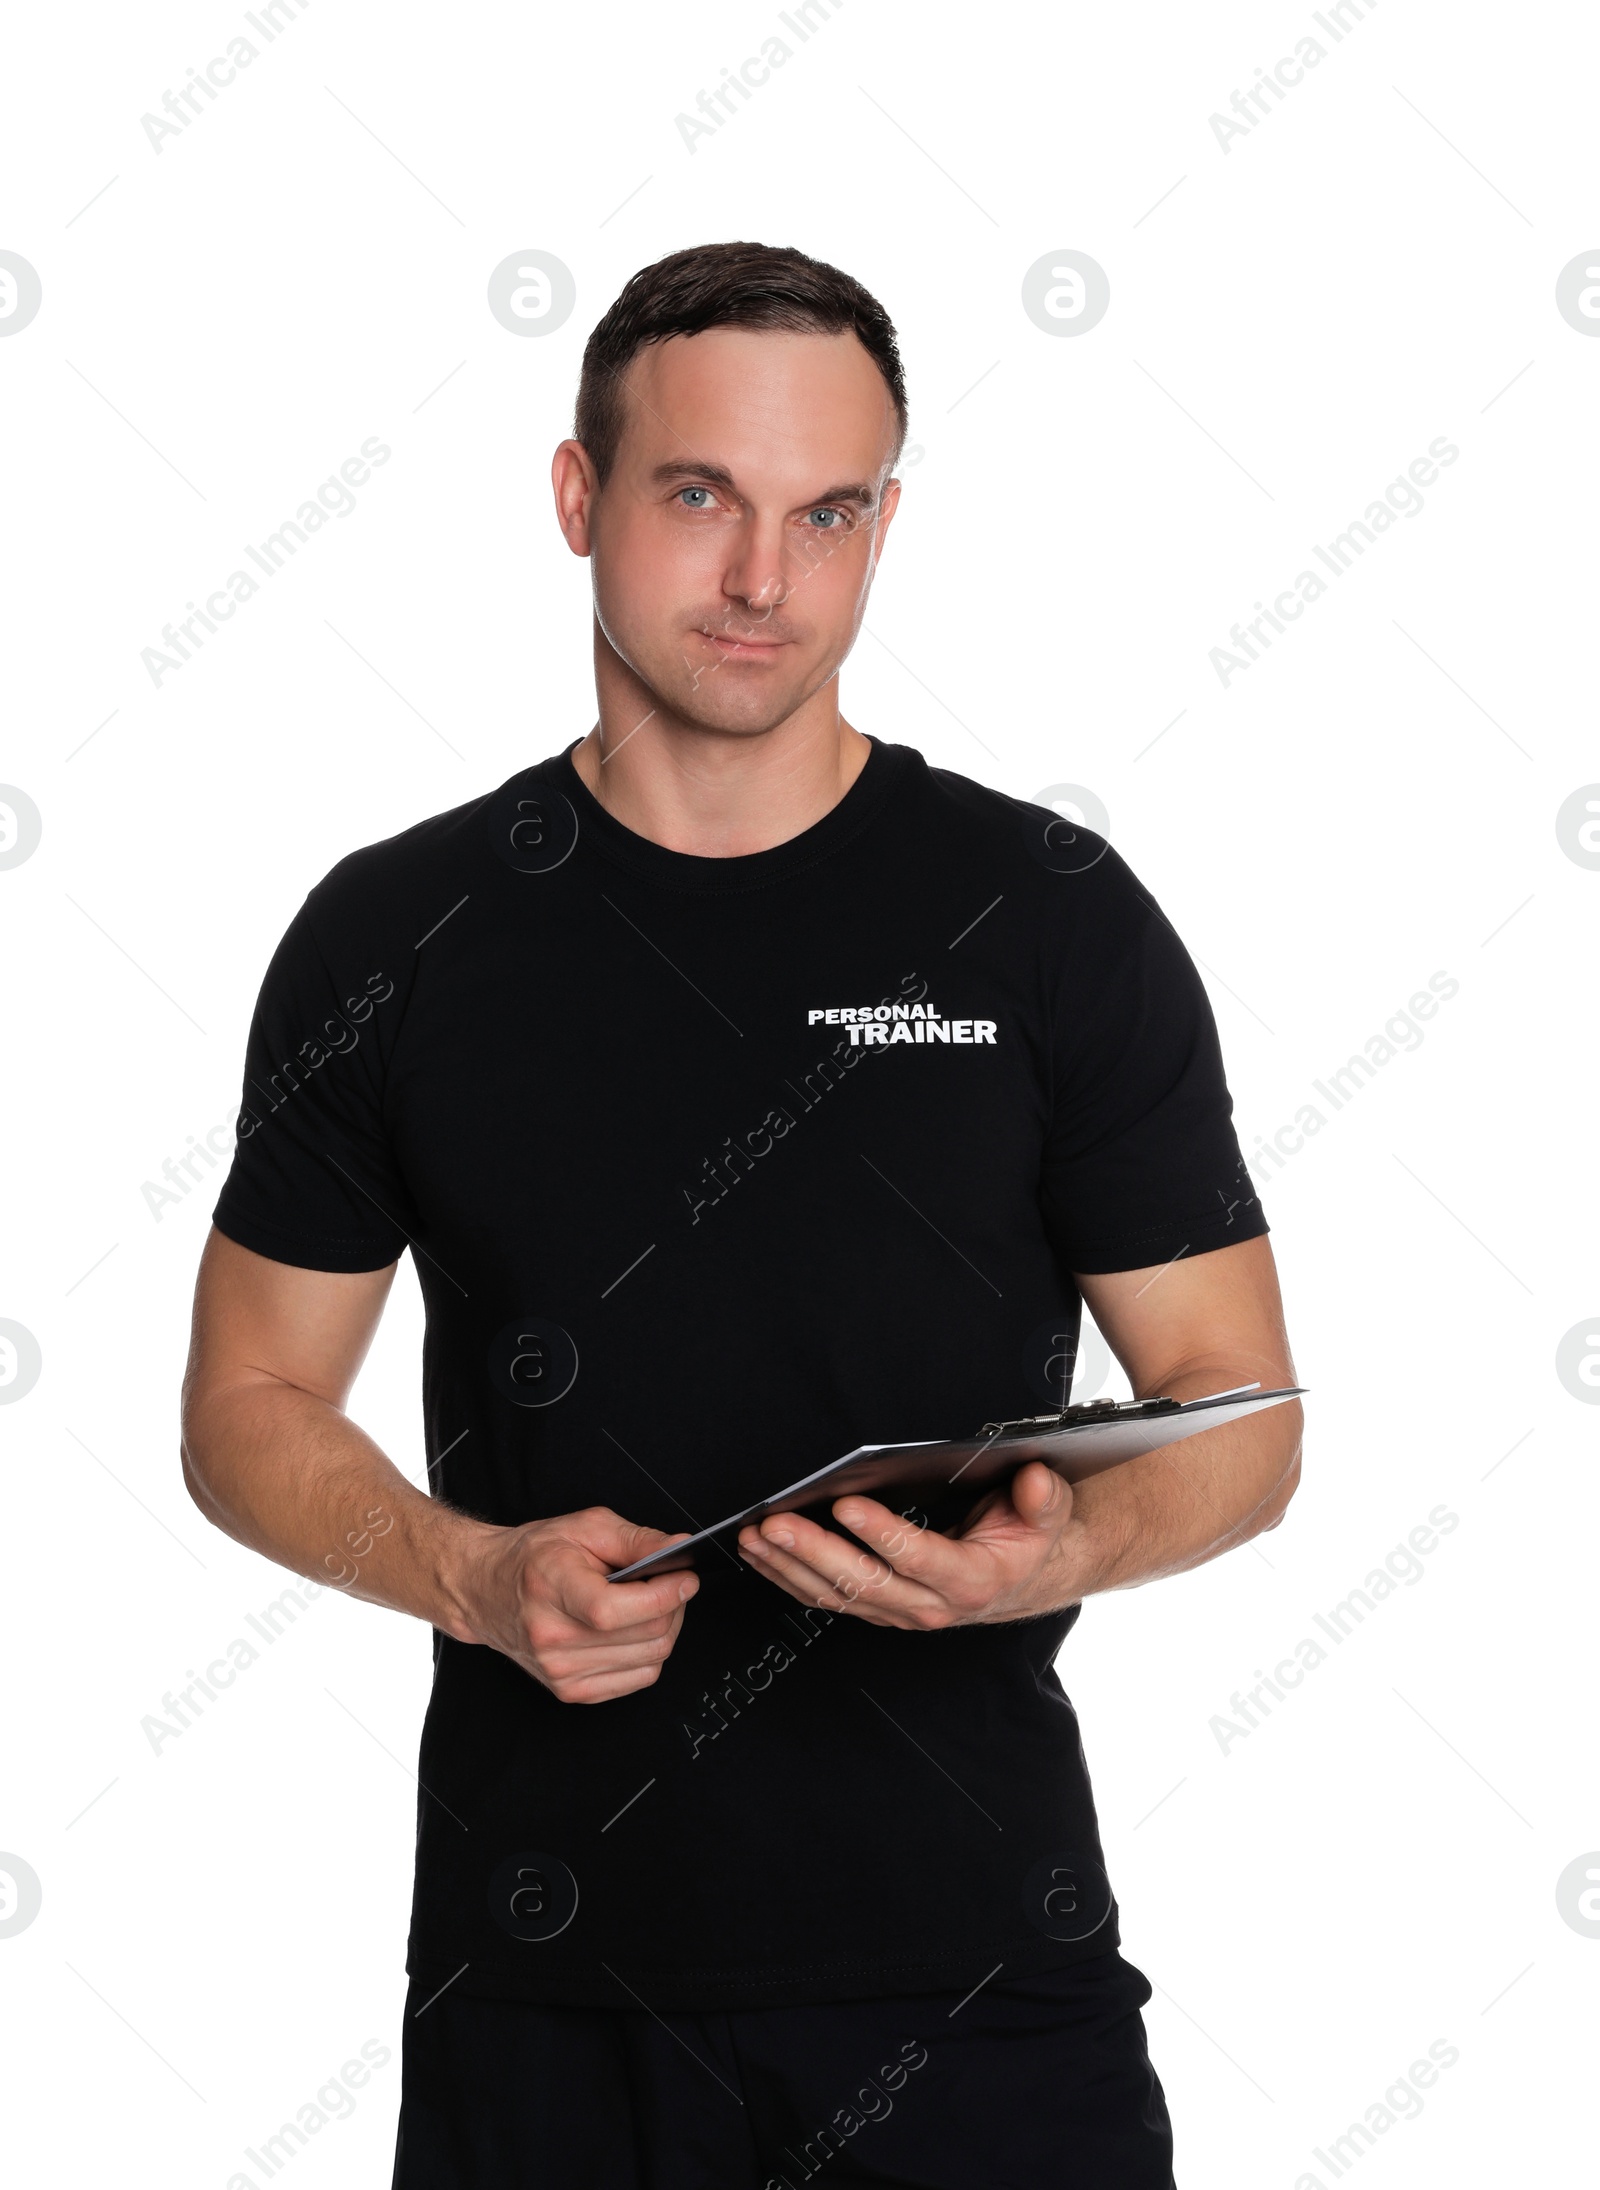 Photo of Personal trainer with clipboard on white background. Gym instructor